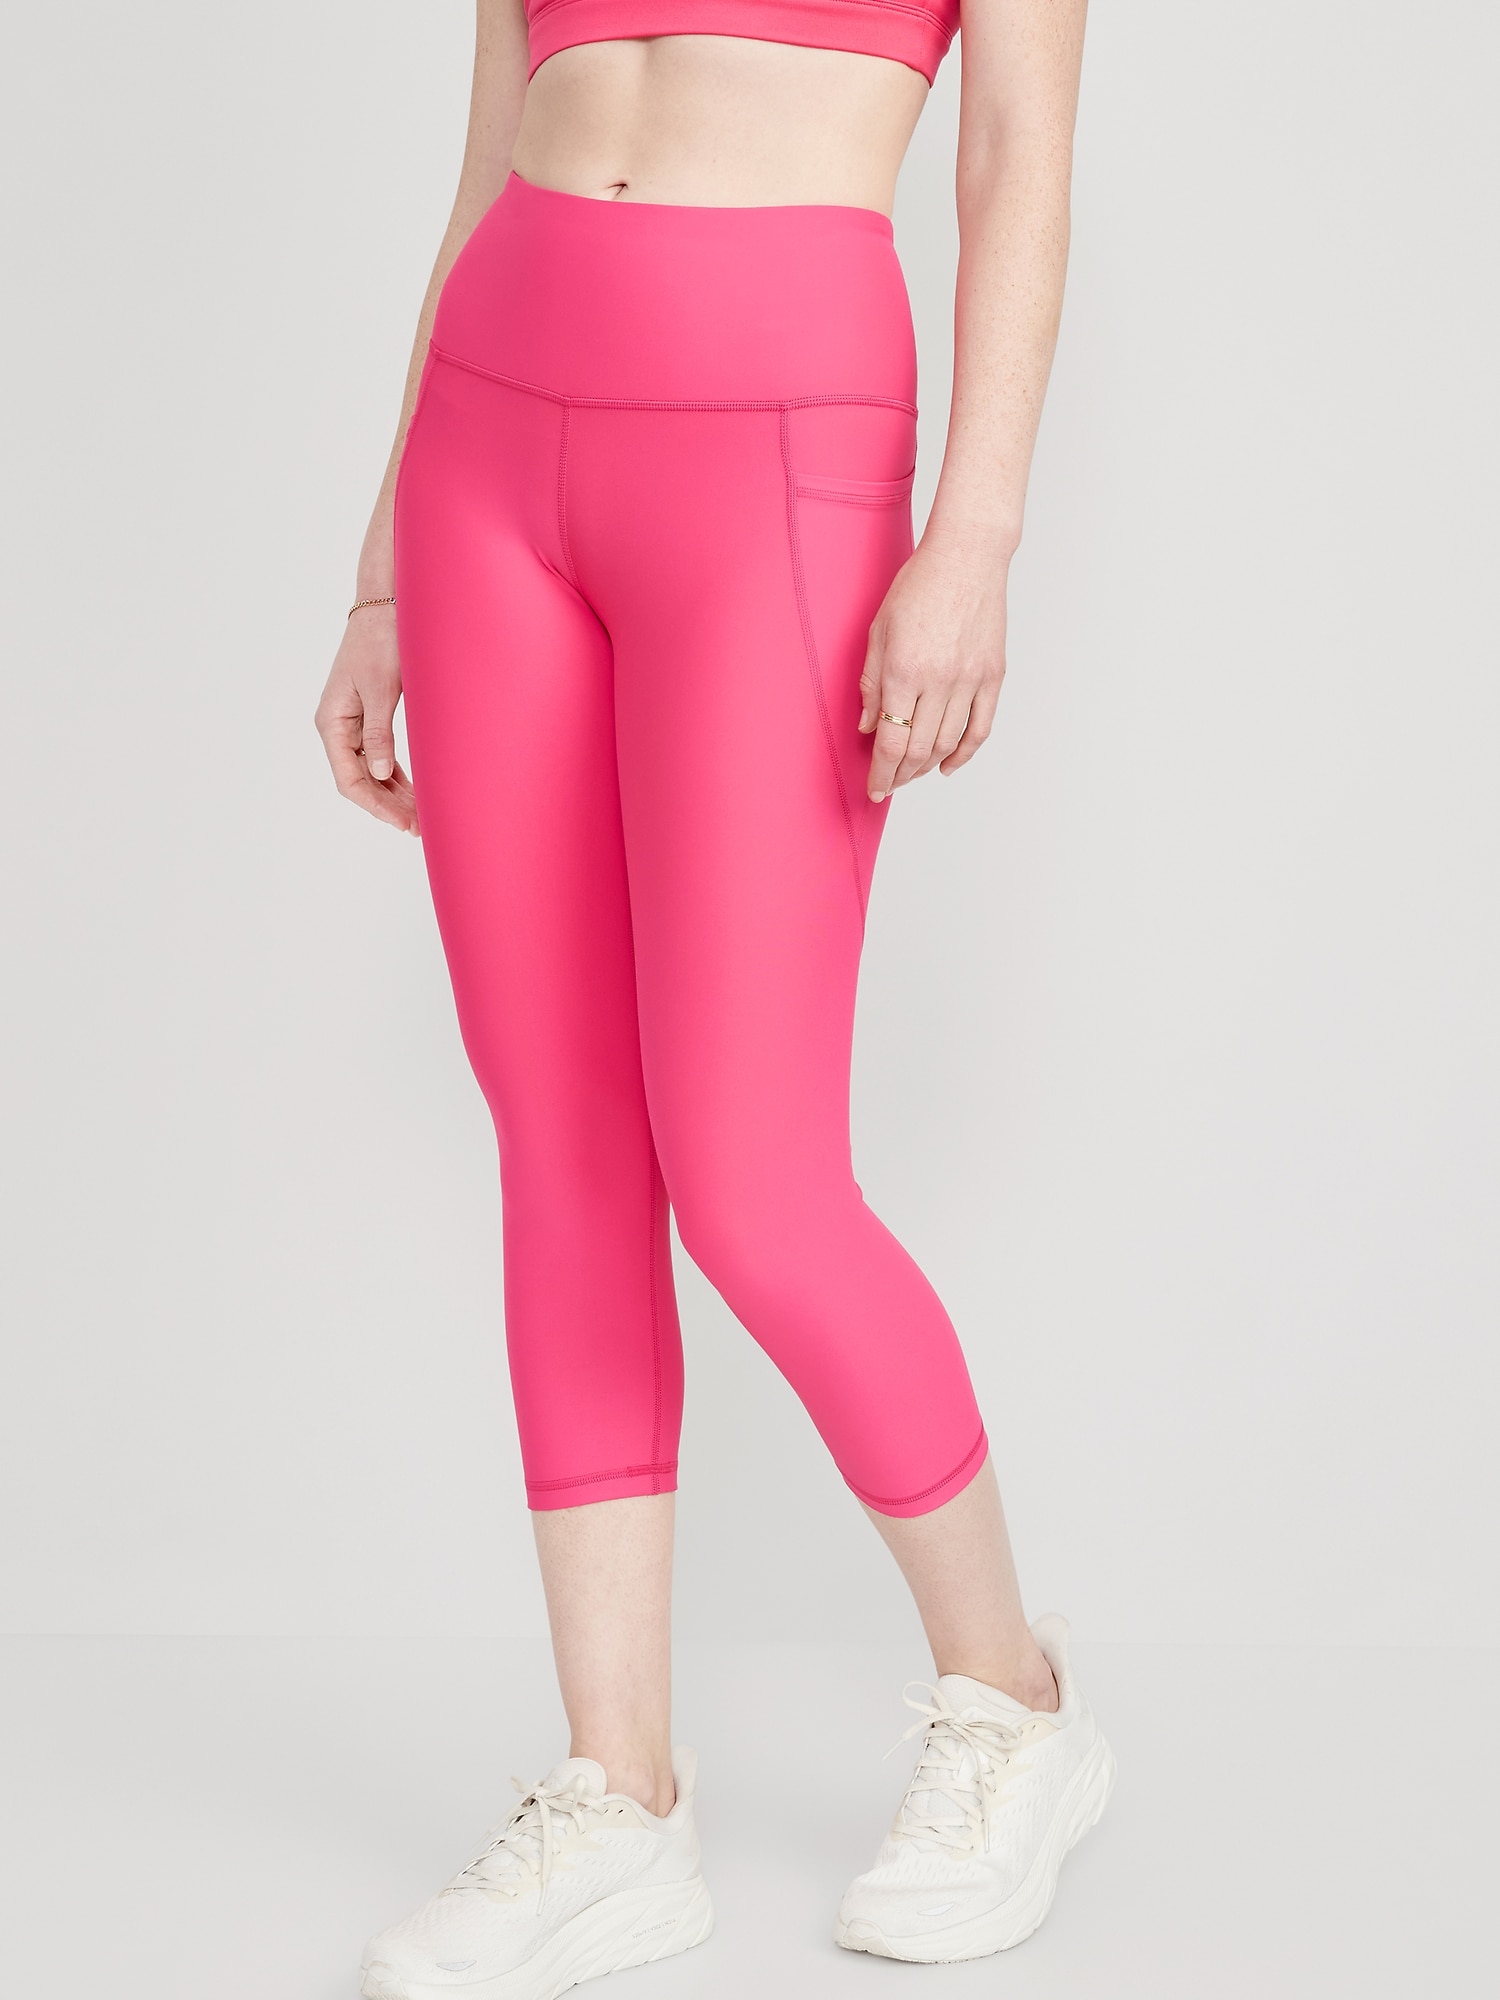 Old Navy High-Waisted PowerSoft Side-Pocket Crop Leggings for Women pink. 1